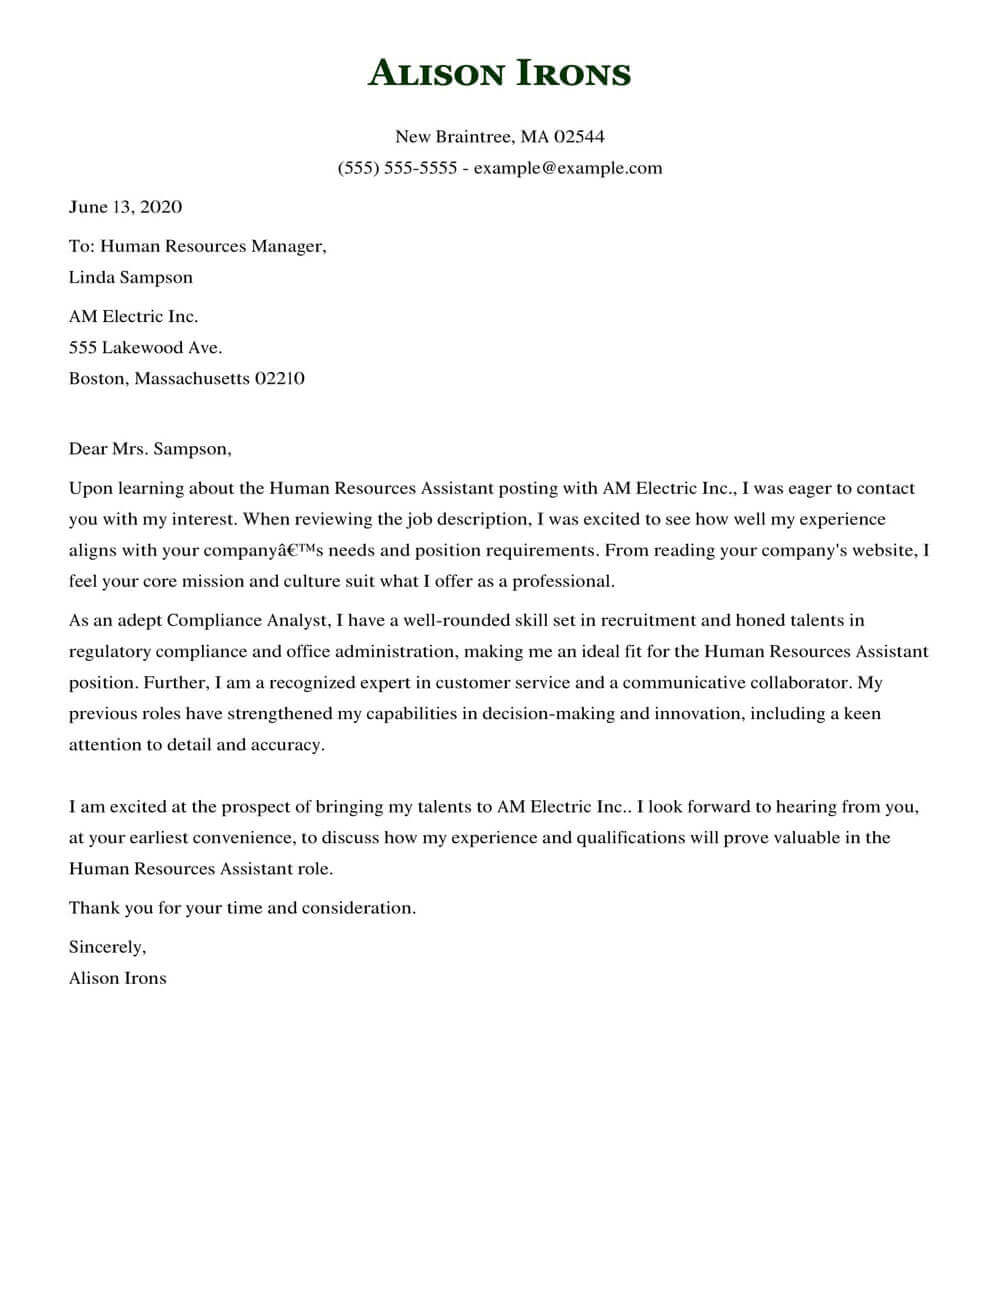 Human Resources Assistant cover letter example